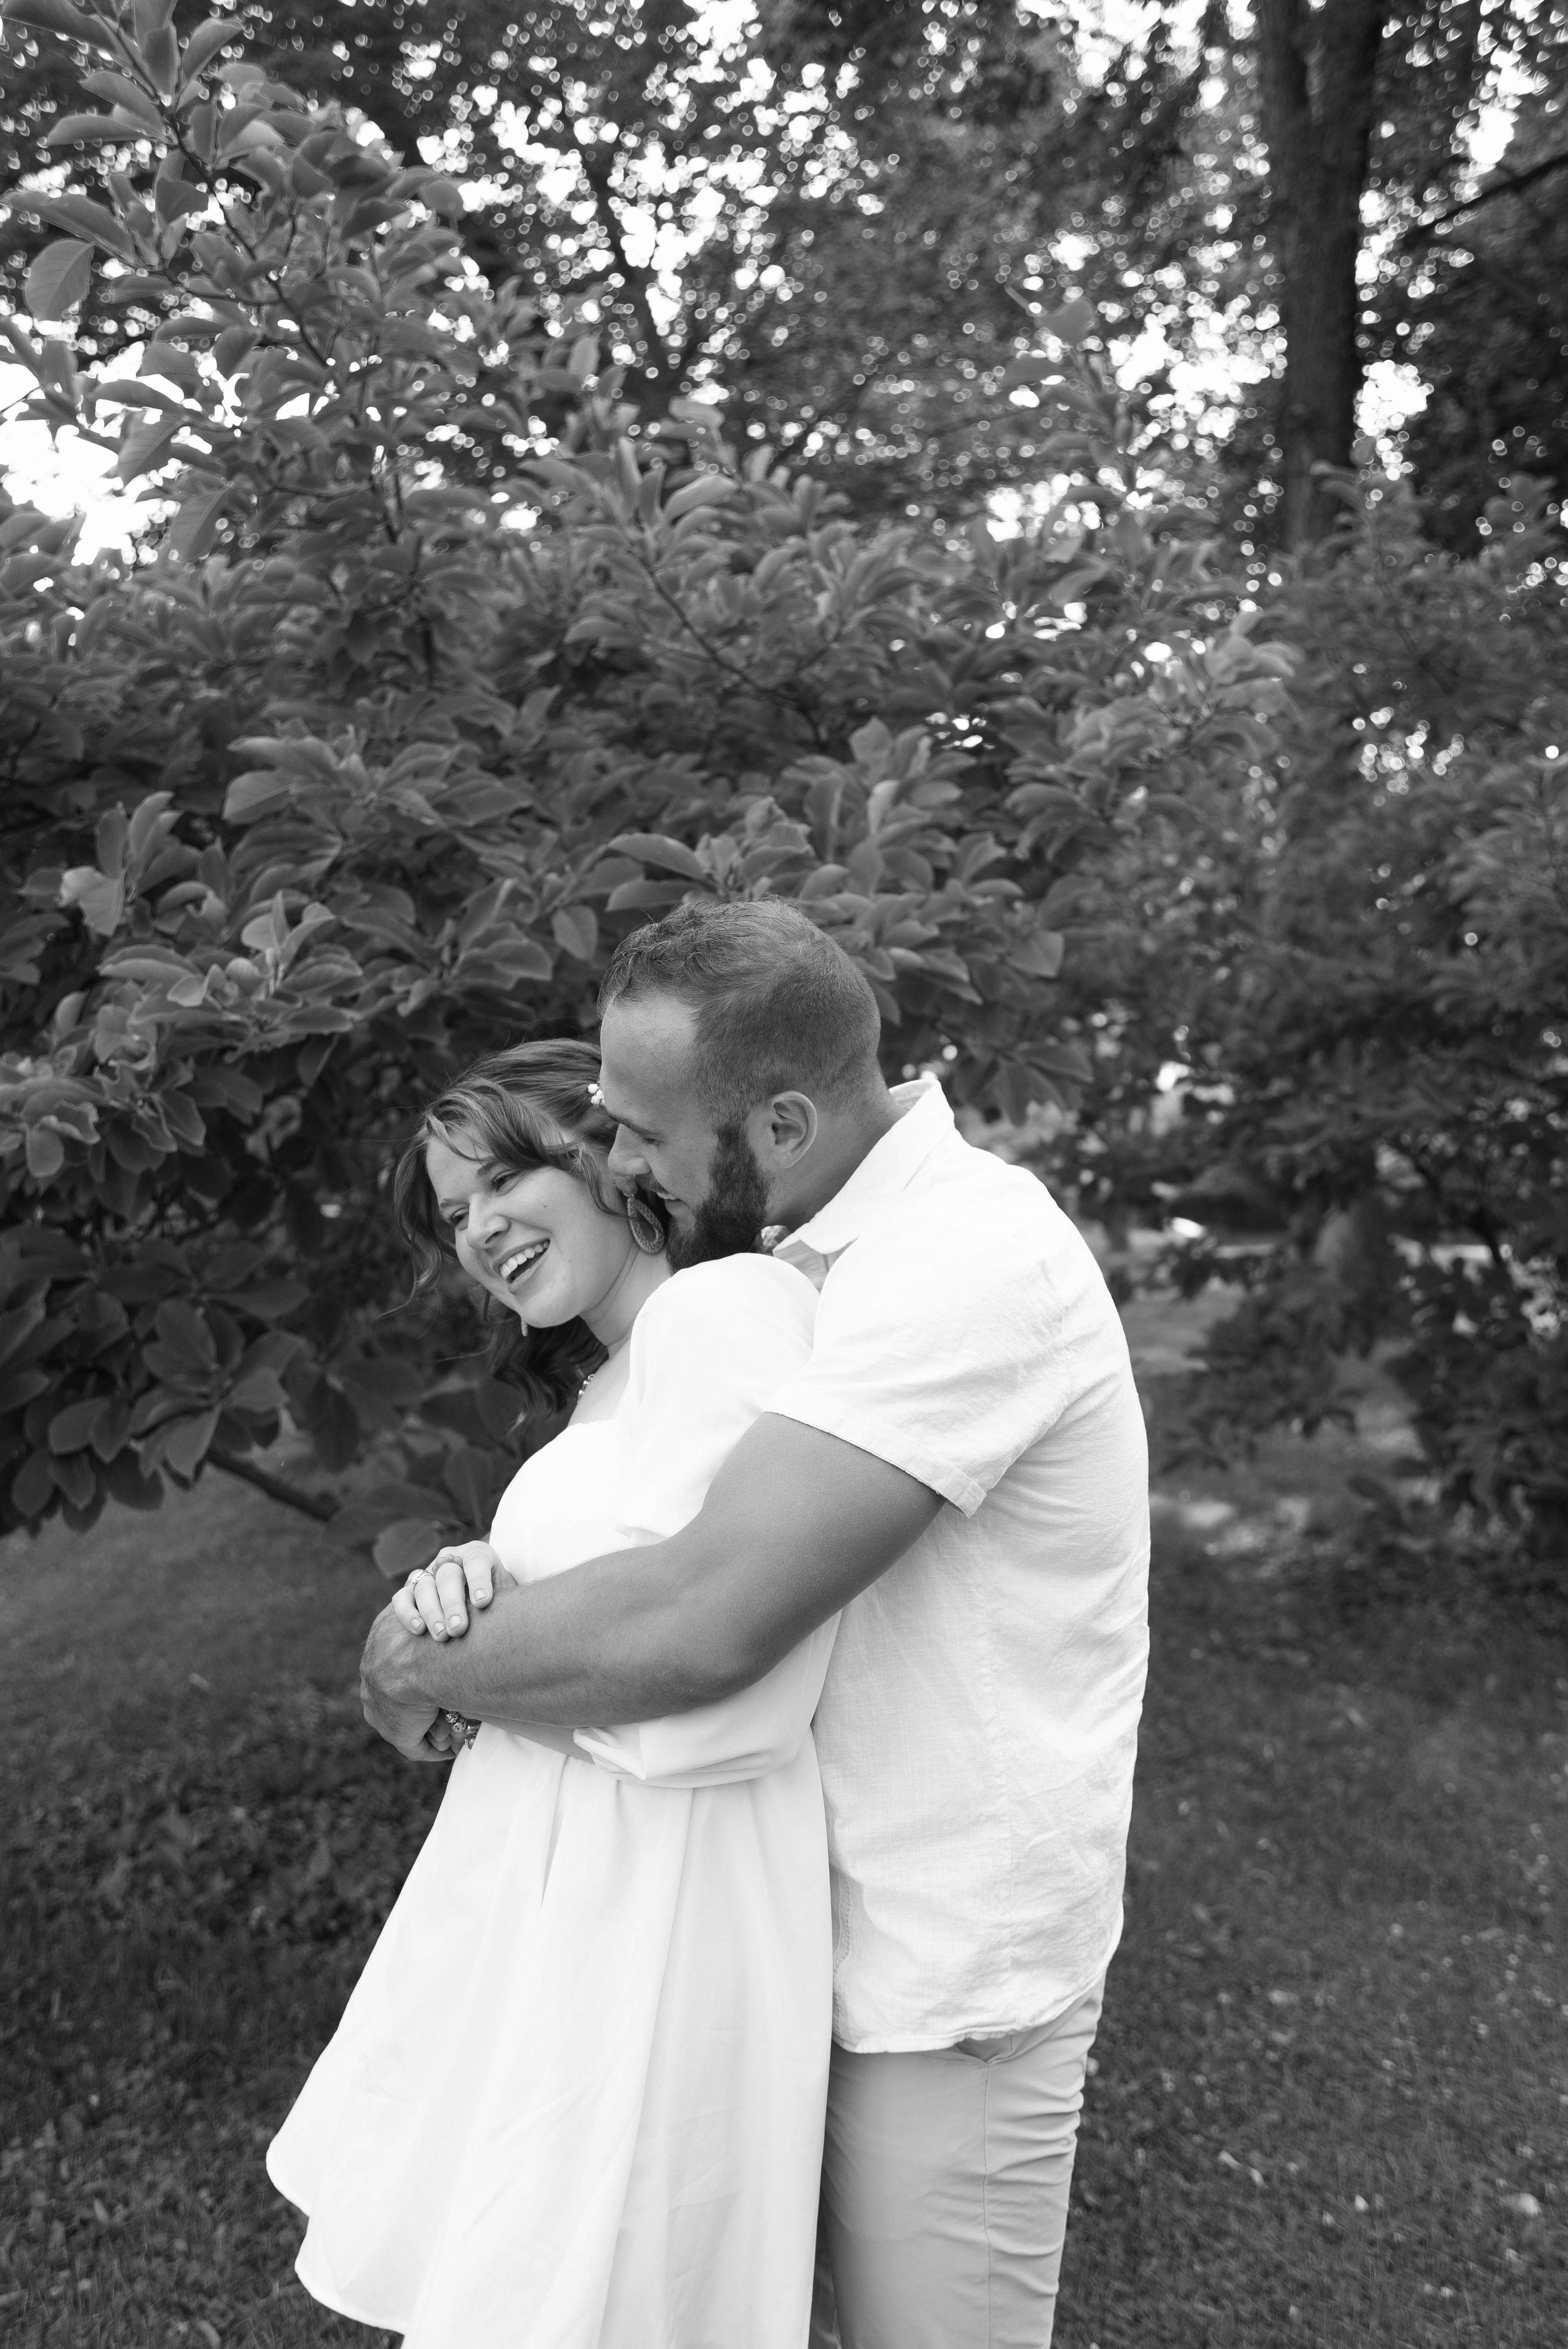 The Wedding Website of Haley Grimm and Marcus Protz